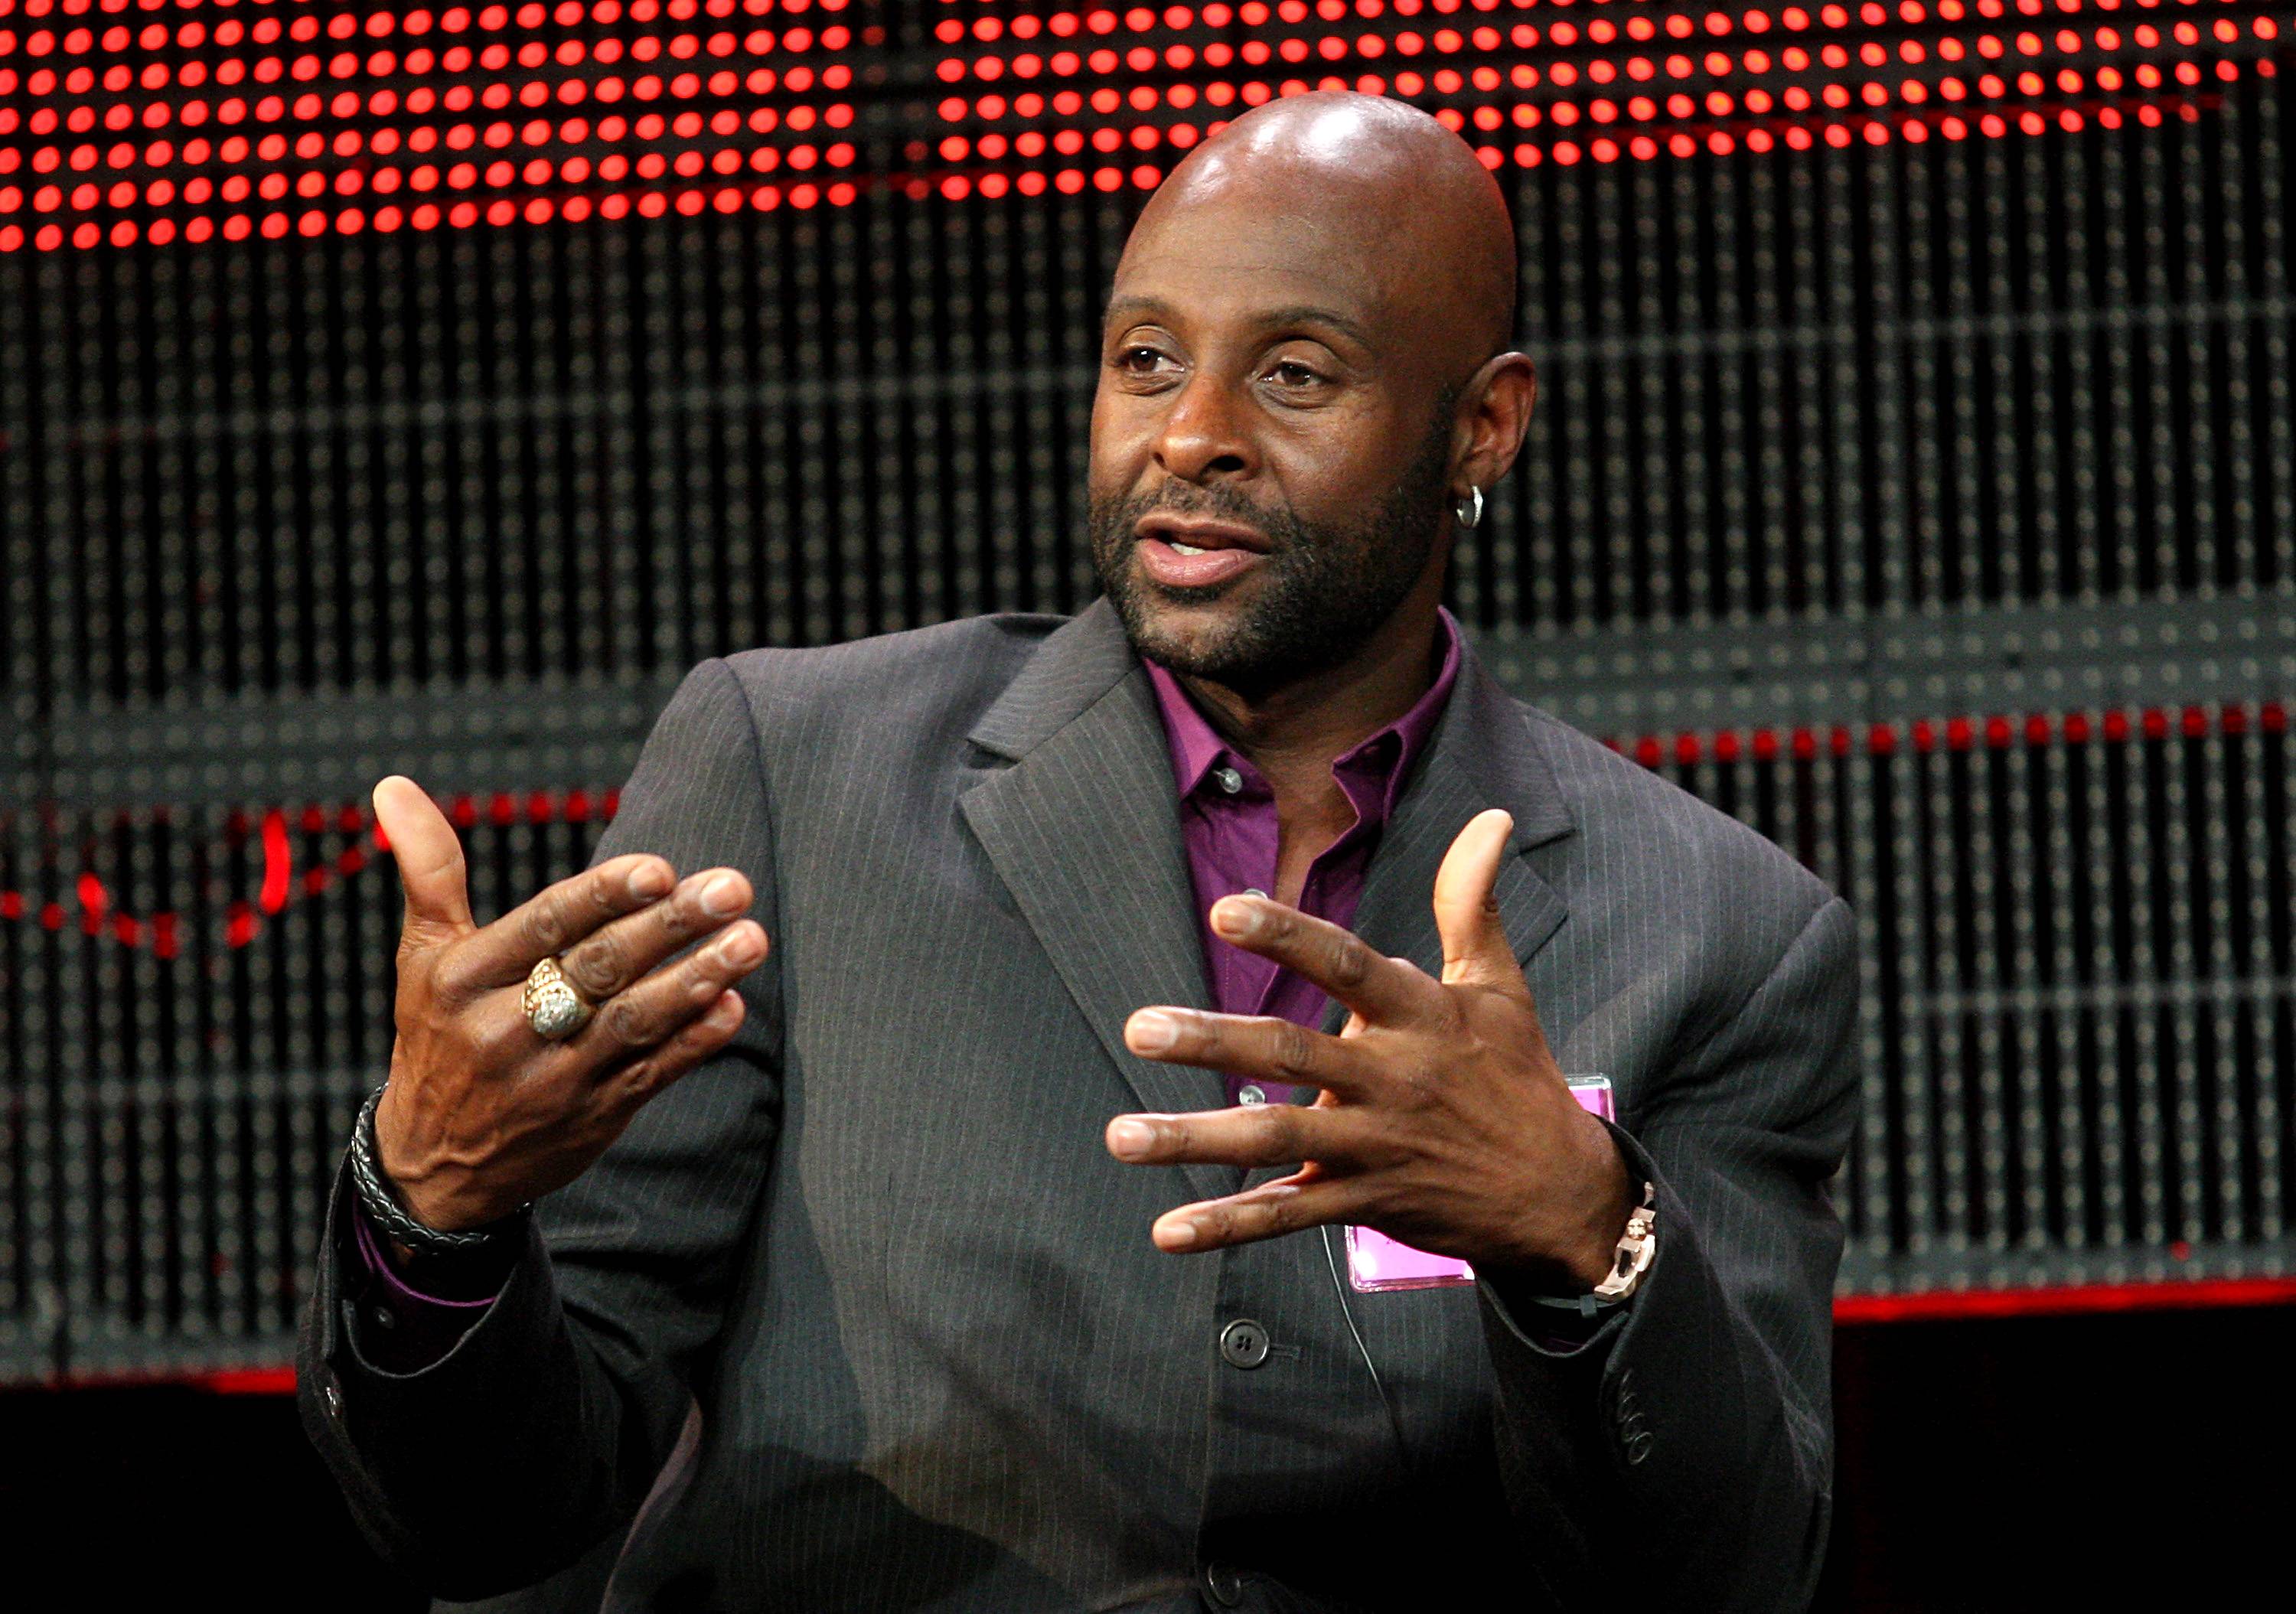 Jerry Rice - The NFL legend celebrates his 49th birthday. (Photo: Frederick M. Brown/Getty Images)